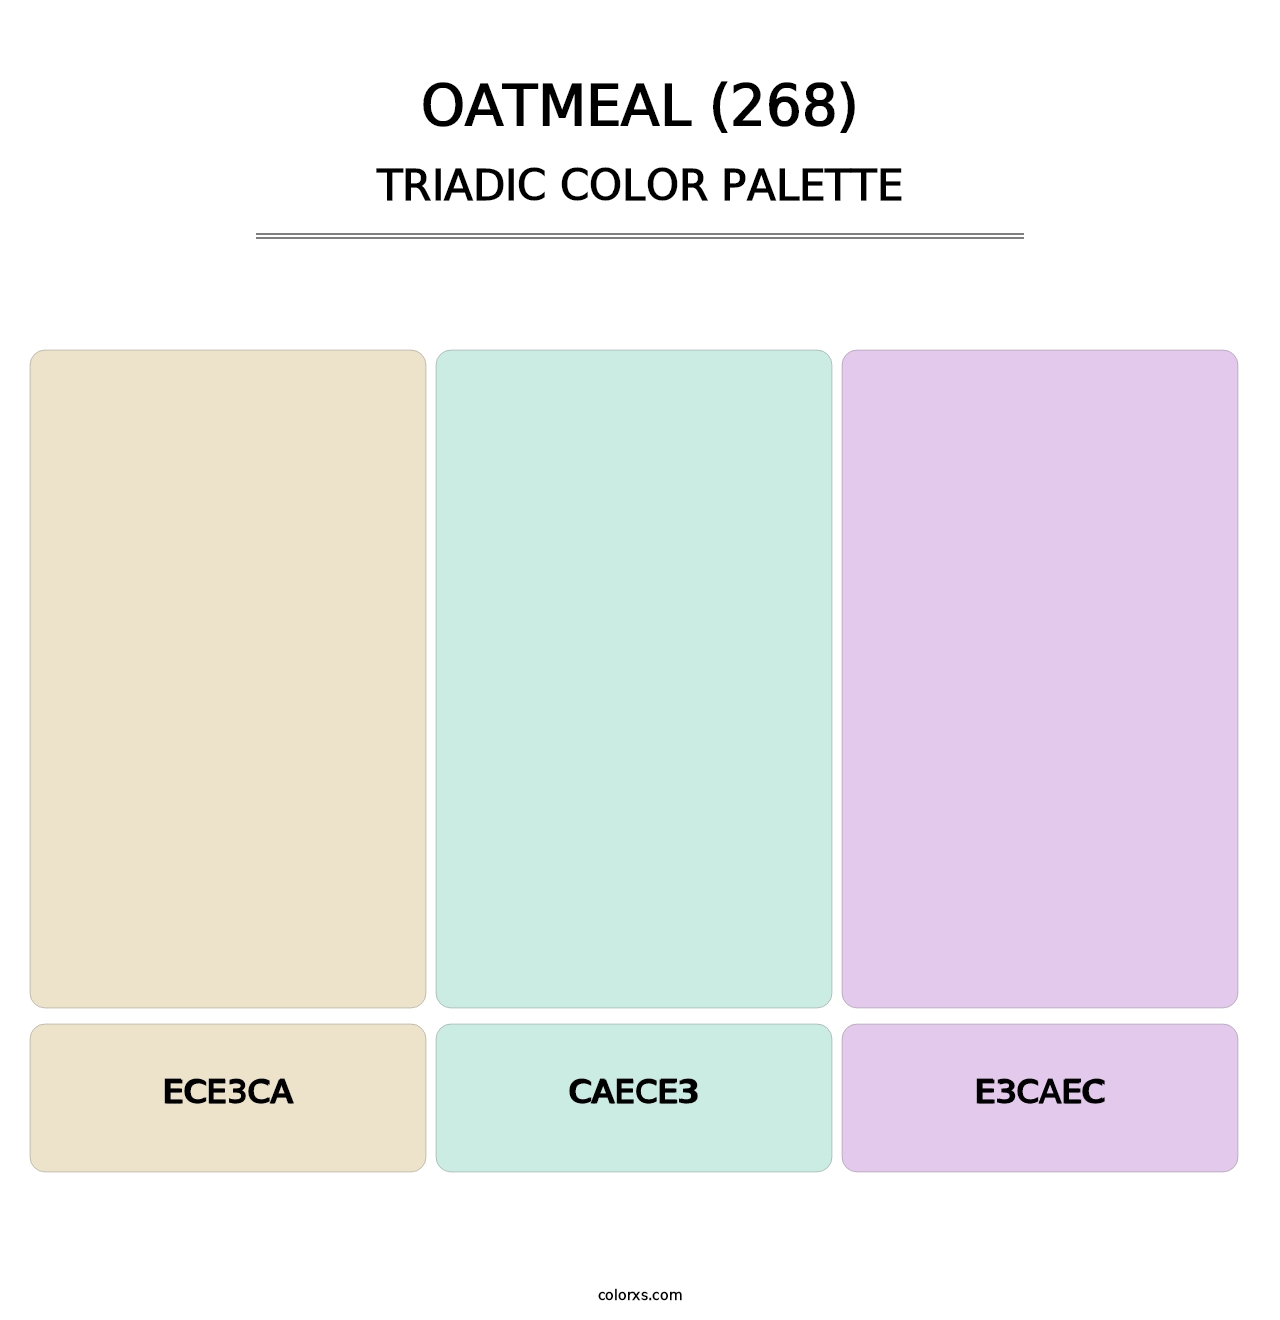 Oatmeal (268) - Triadic Color Palette